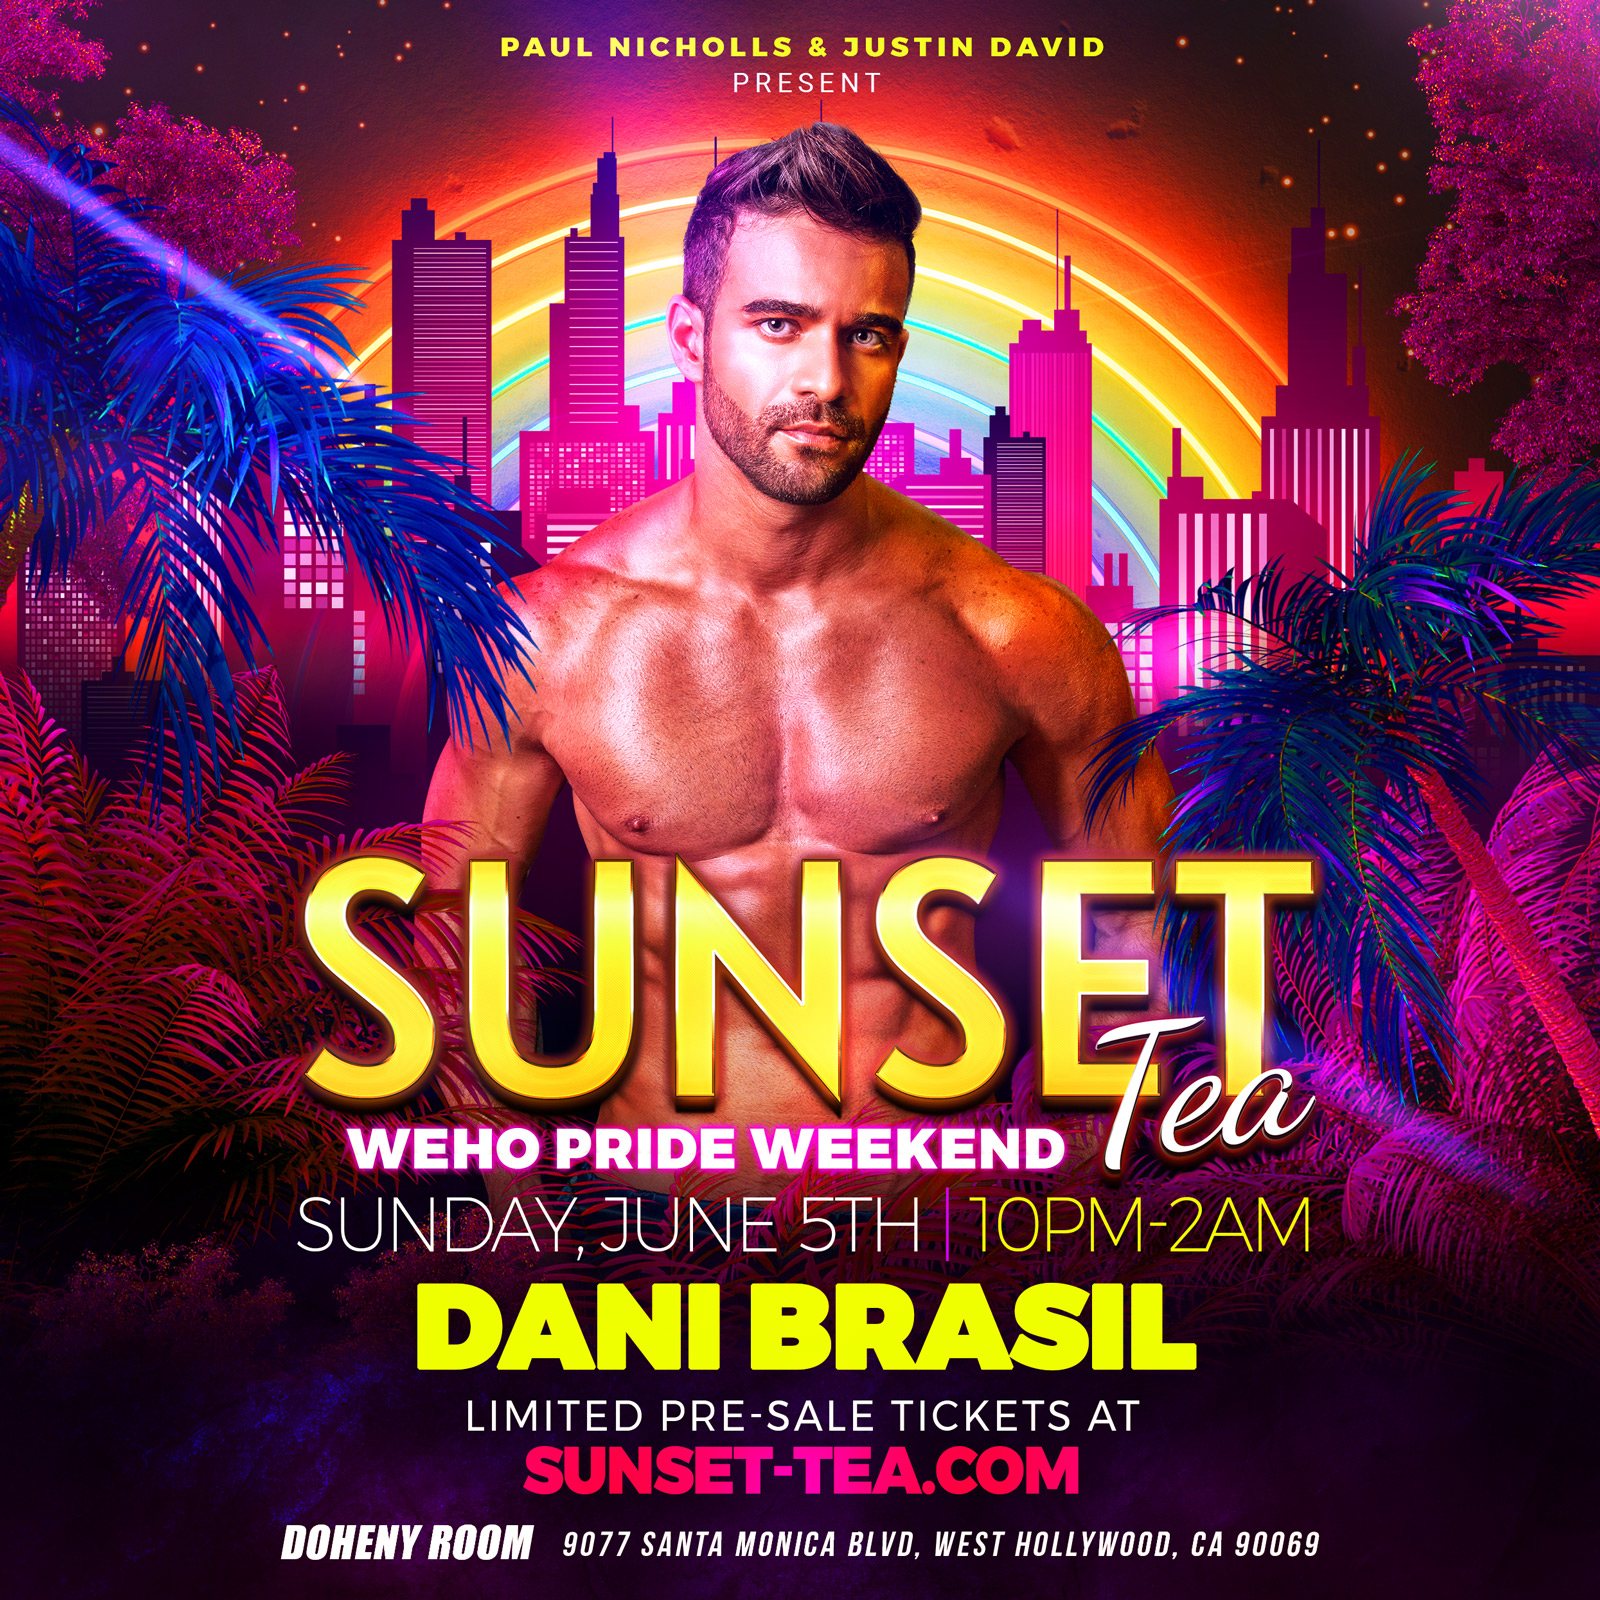 Buy Tickets to SUNSET TEA WEHO PRIDE in West Hollywood on Jun 05, 2022